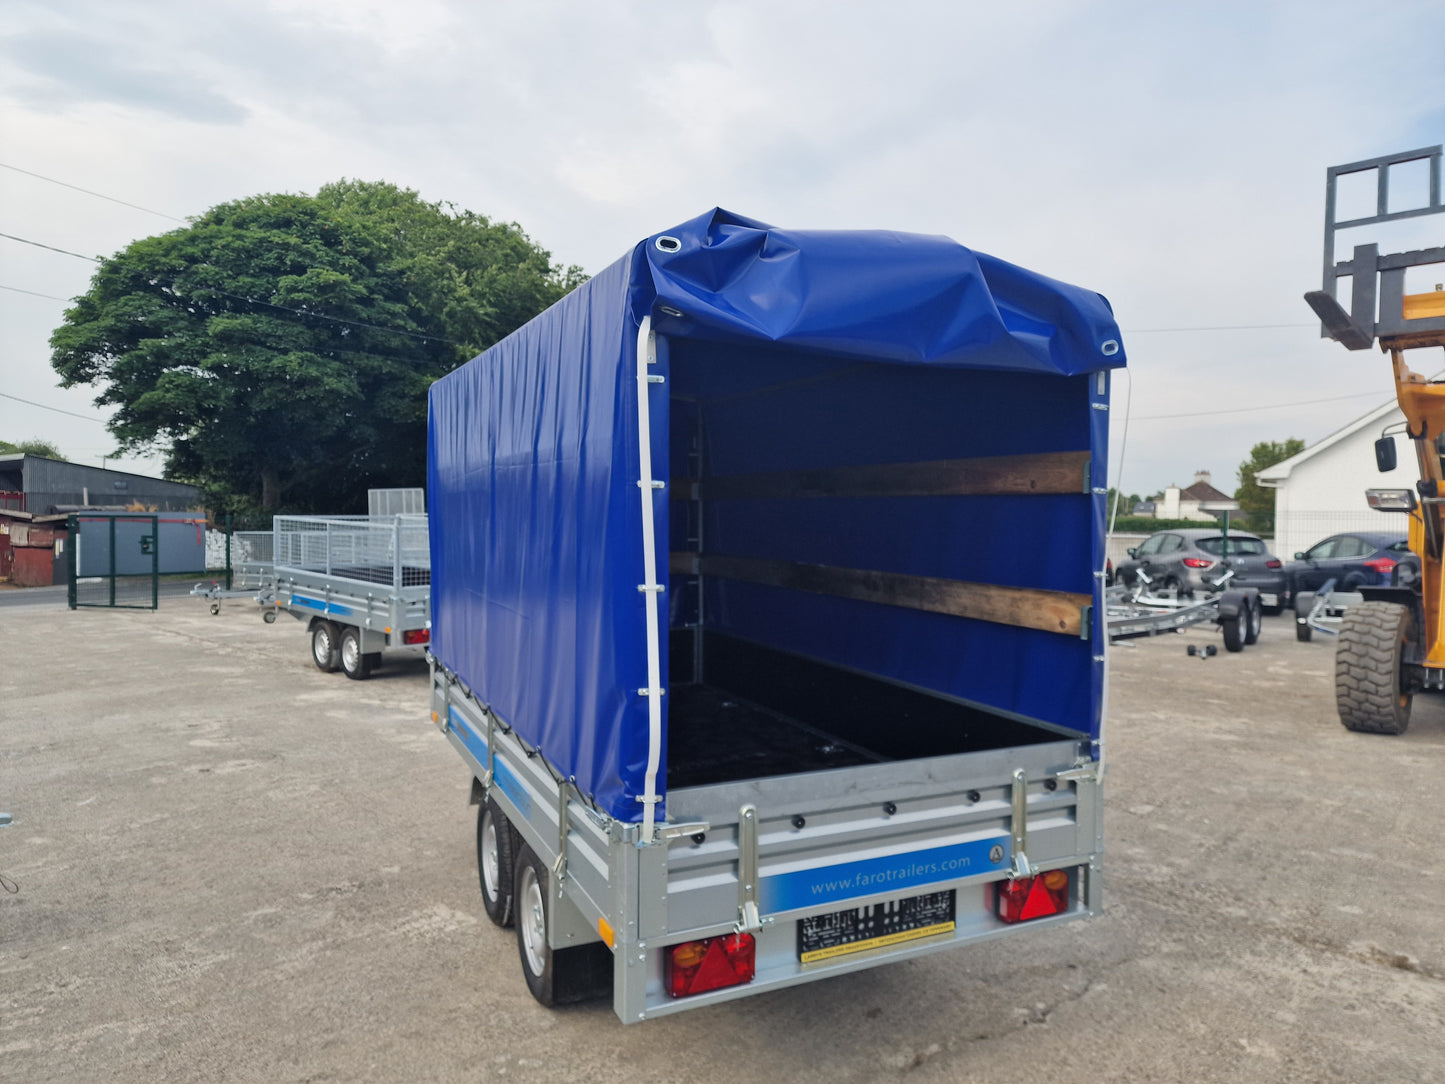 10 x 5 Dropside Trailer with Cover